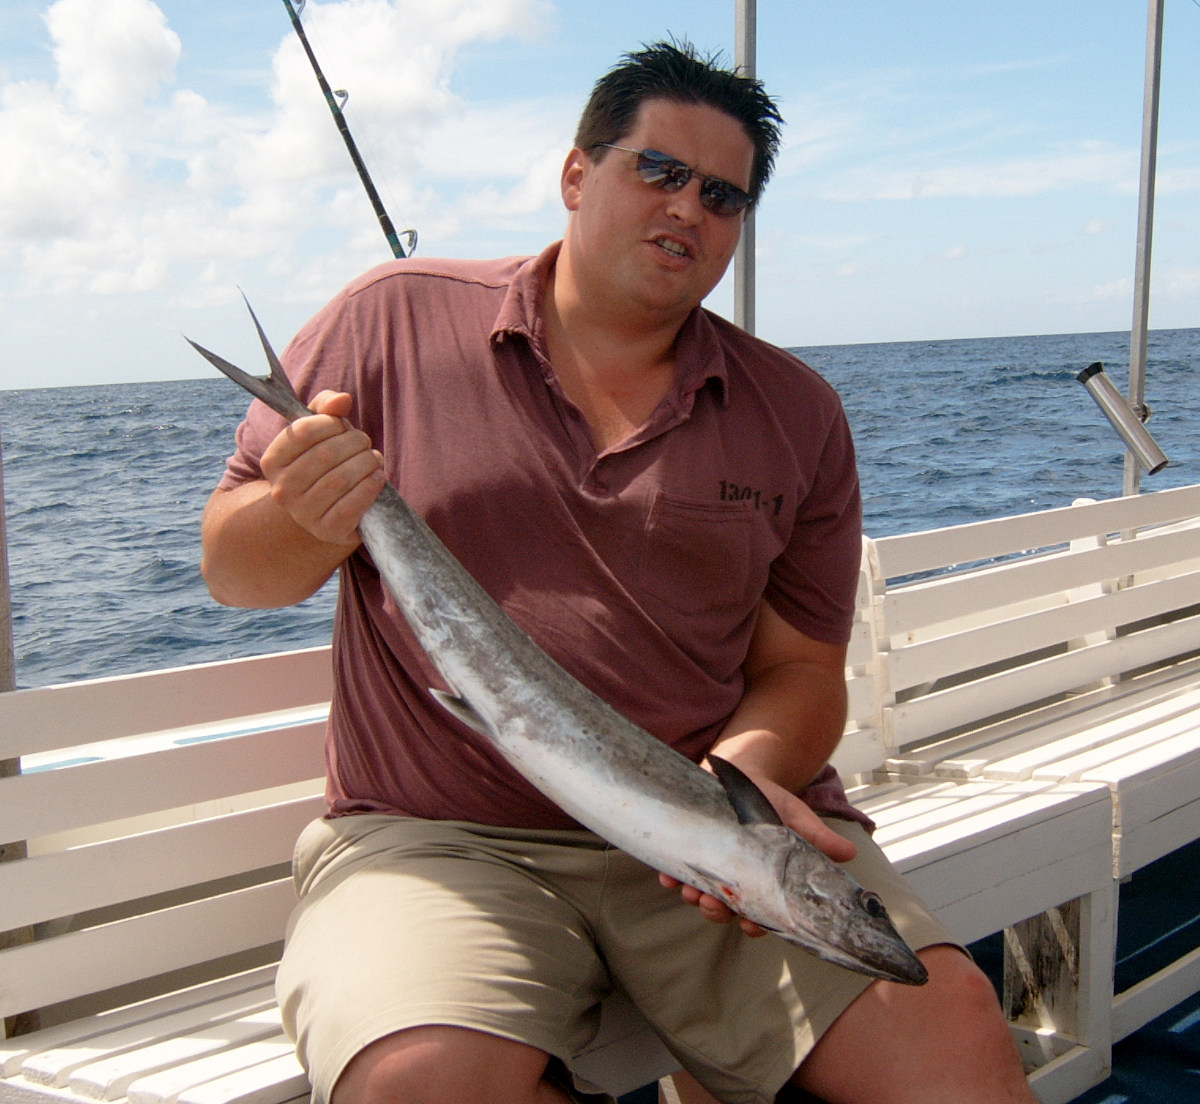 The author catching a king mackerel in the waters around Saint Lucia.